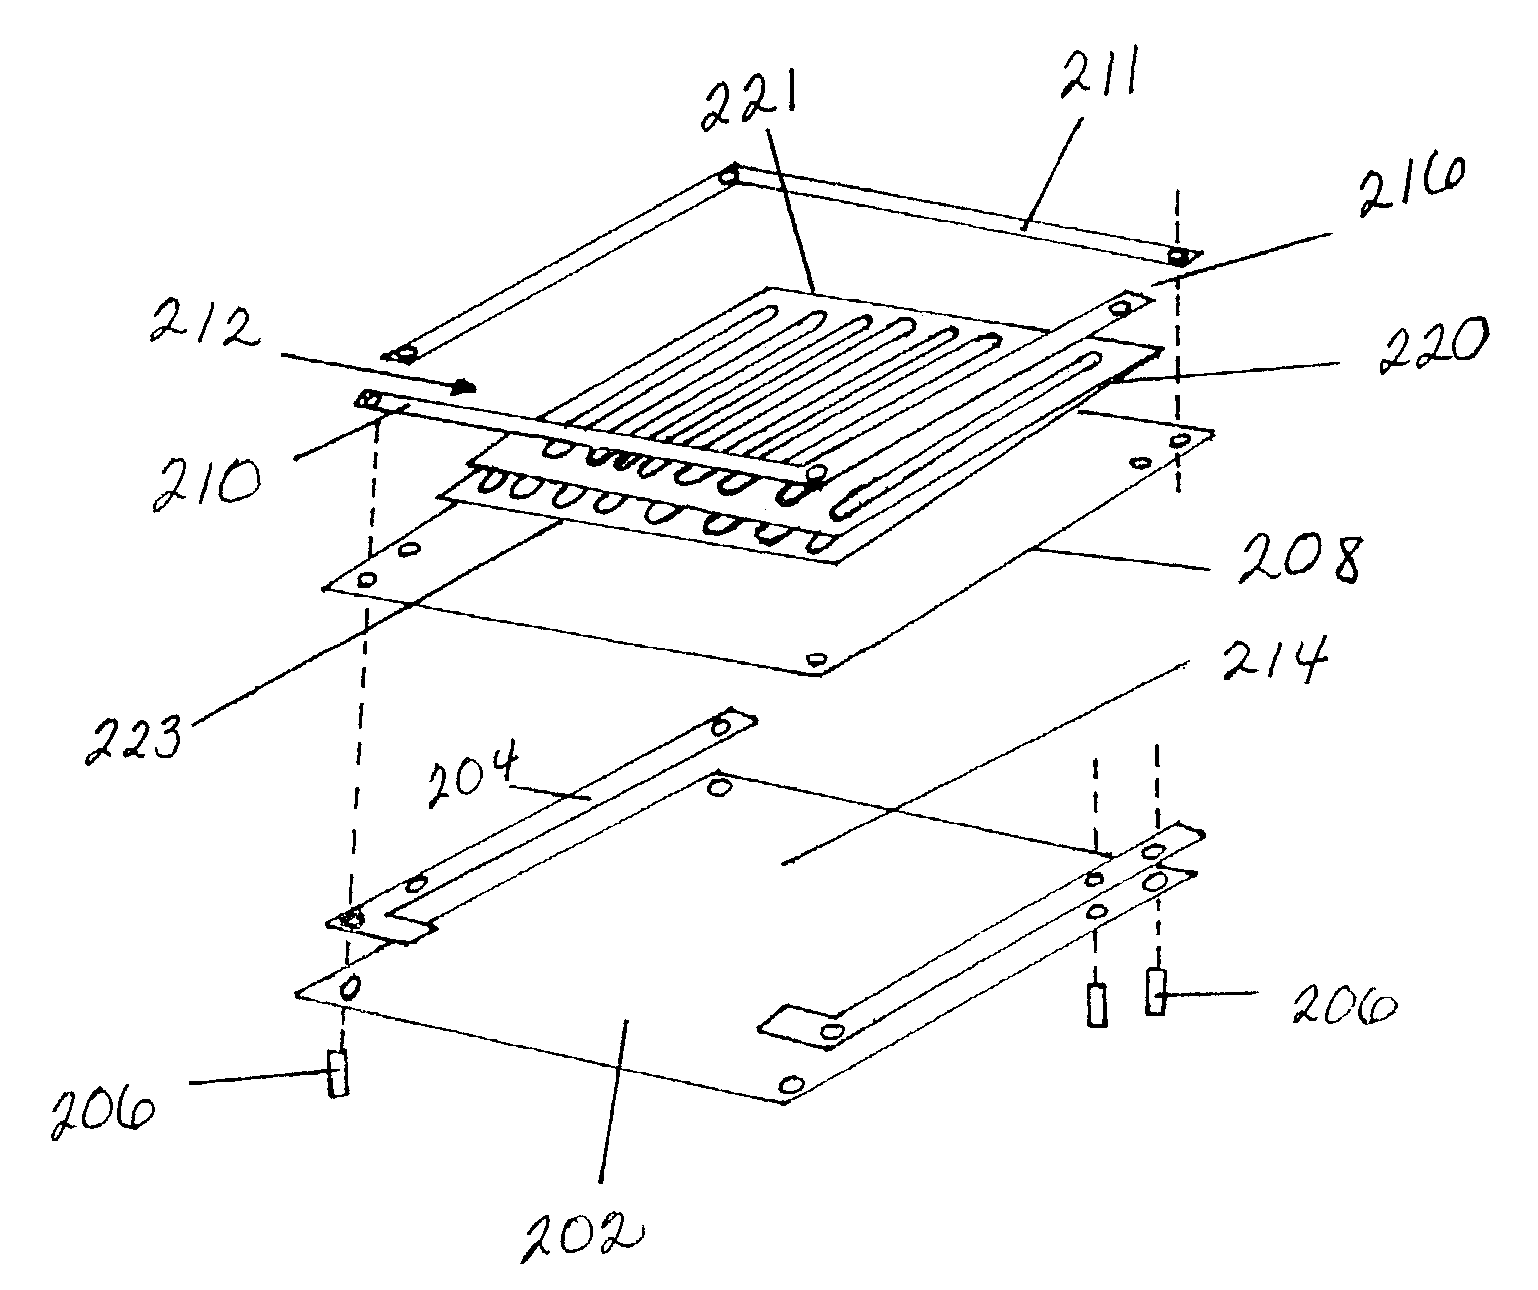 Microchannel apparatus, methods of making microchannel apparatus, and processes of conducting unit operations